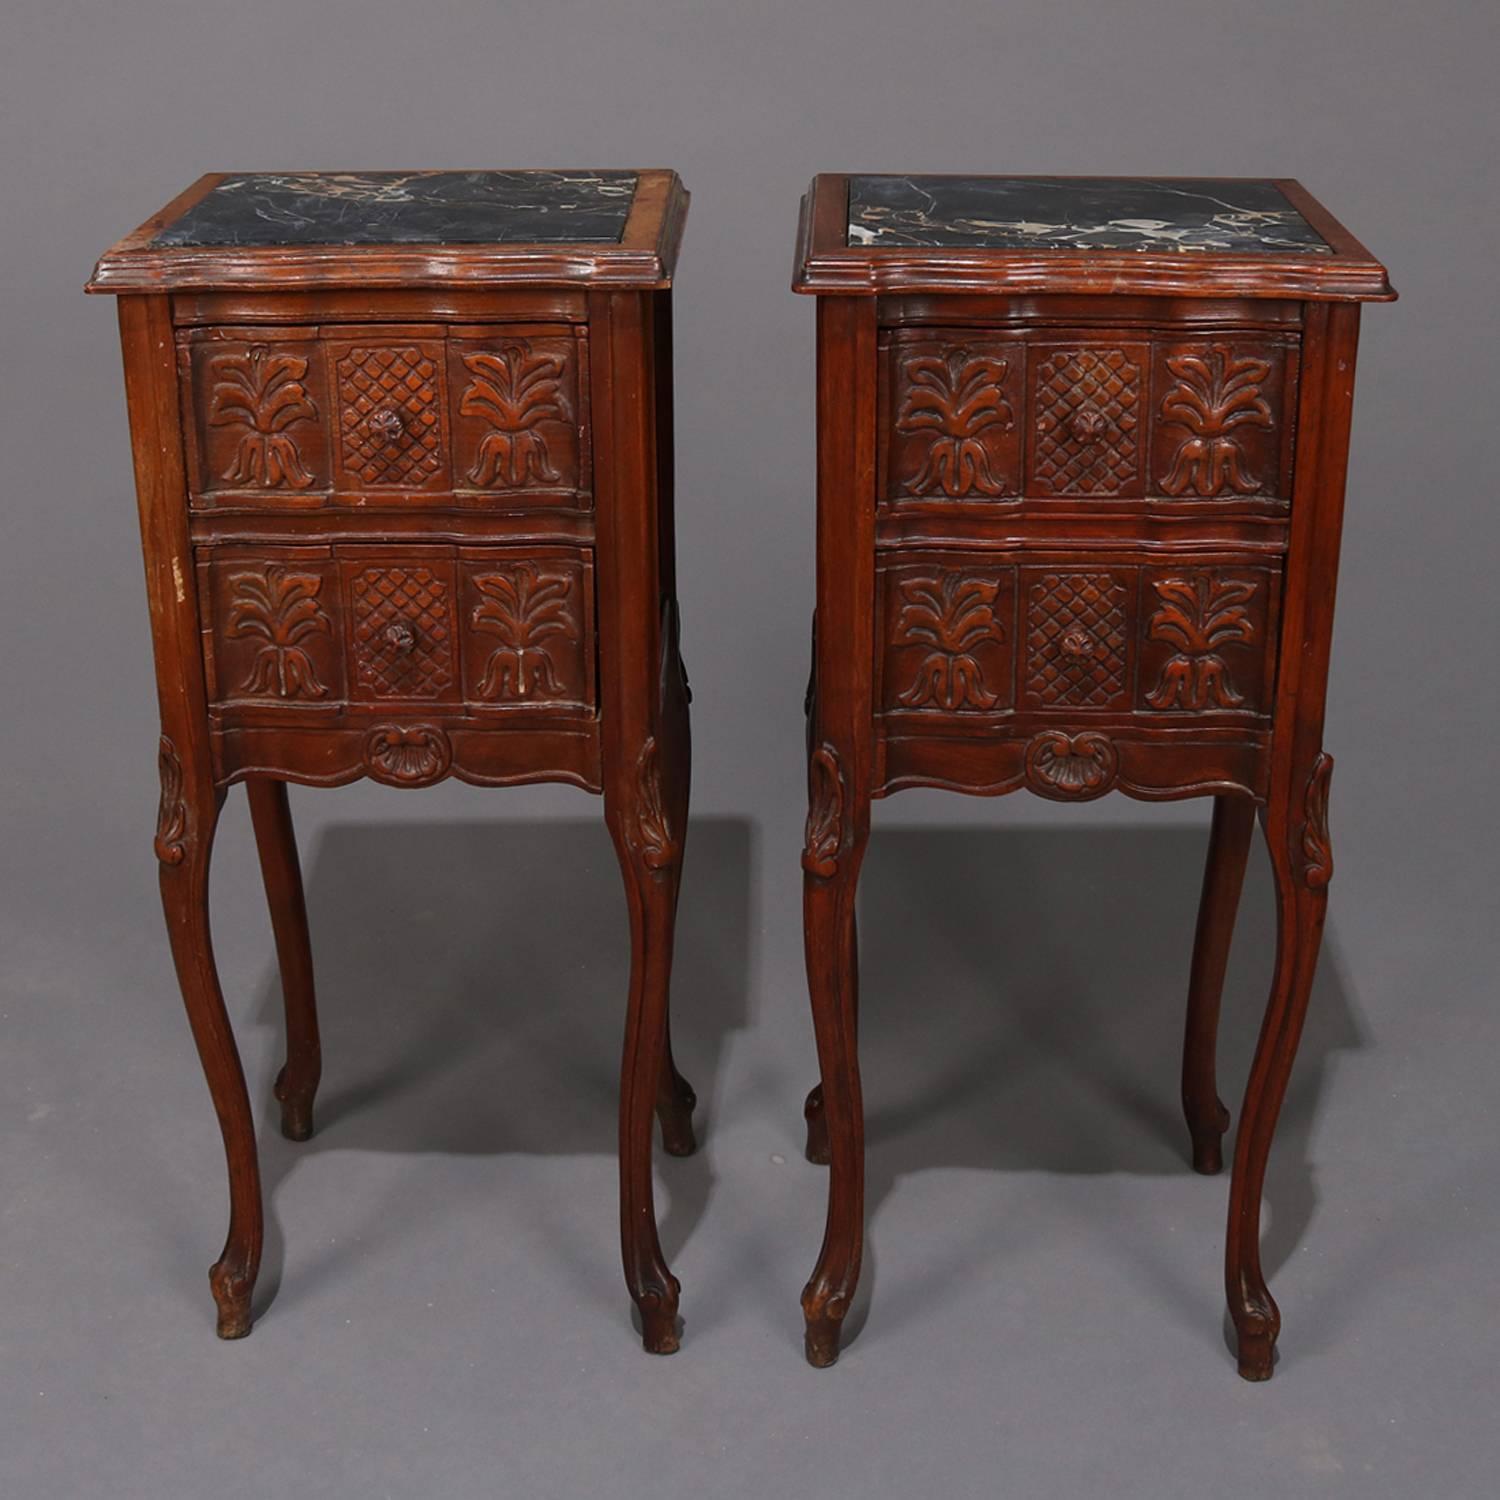 Pair of French Louis XVI style carved mahogany end stands feature shaped top with inset marble, two drawer case having carved foliate and palm decoration and raised on cabriole legs with carved acanthus knees, 20th century

Measures: 29.25